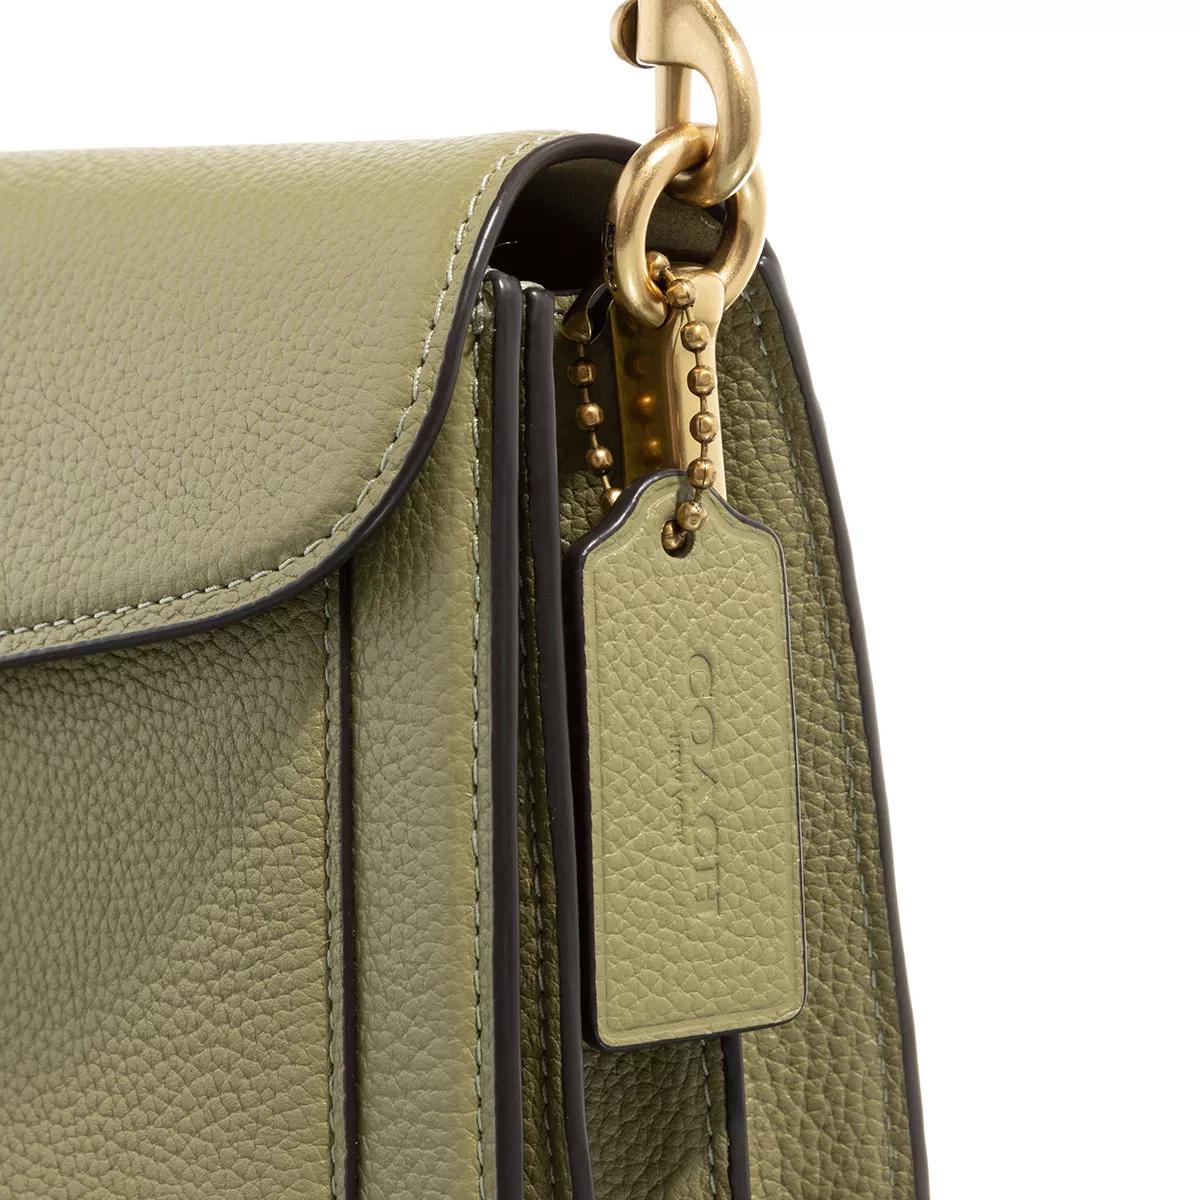 Coach Satchels Polished Pebble Leather Covered C Closure Tabby Sh in groen